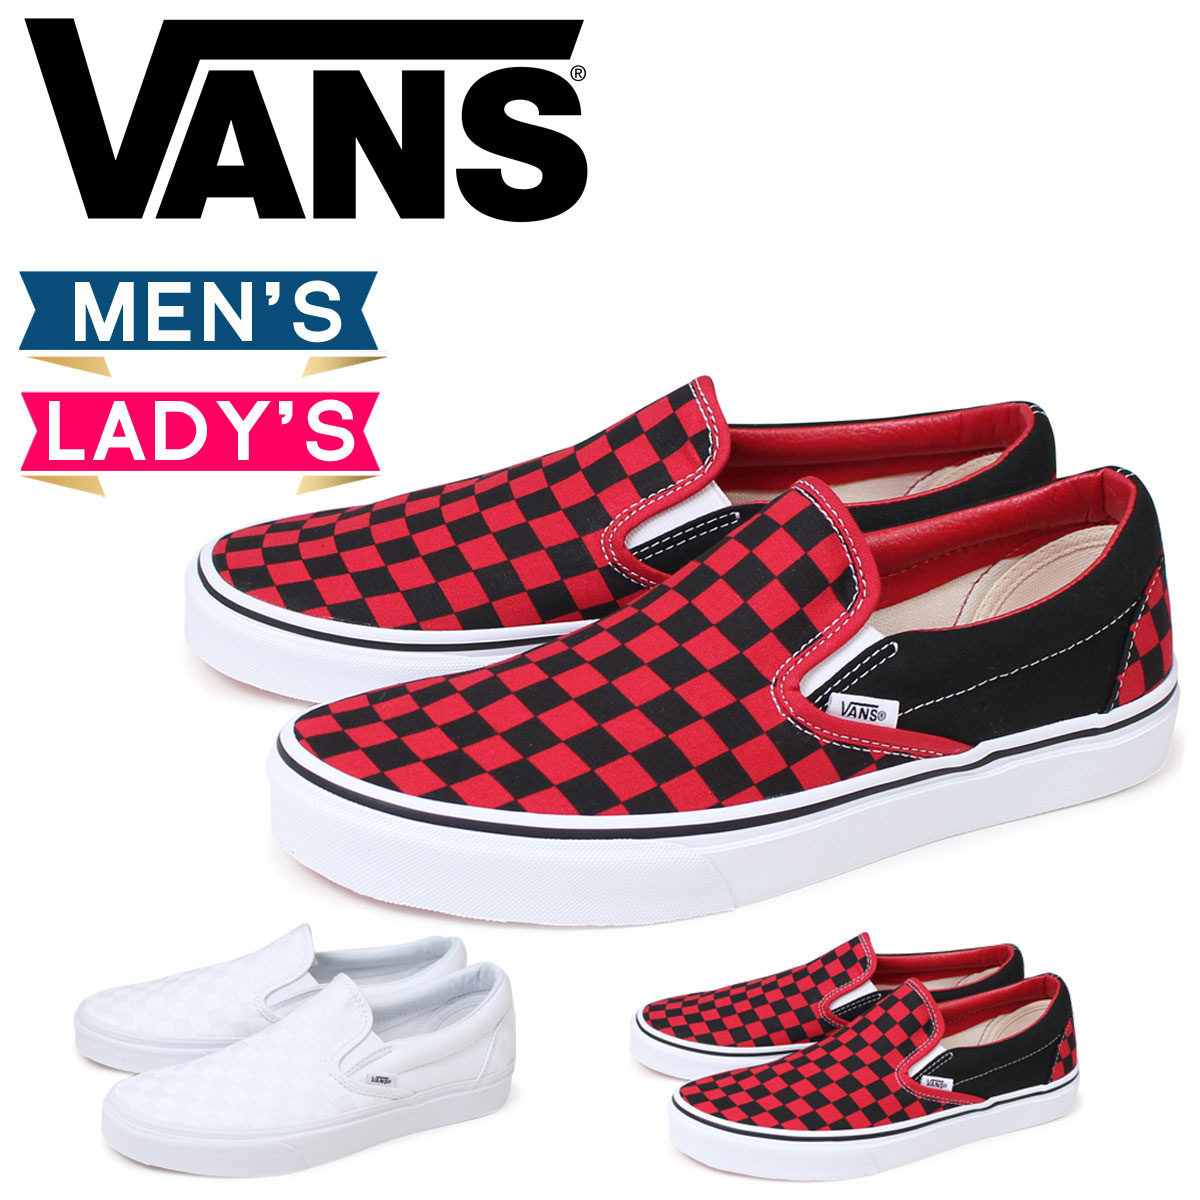 vans slip ons red and white